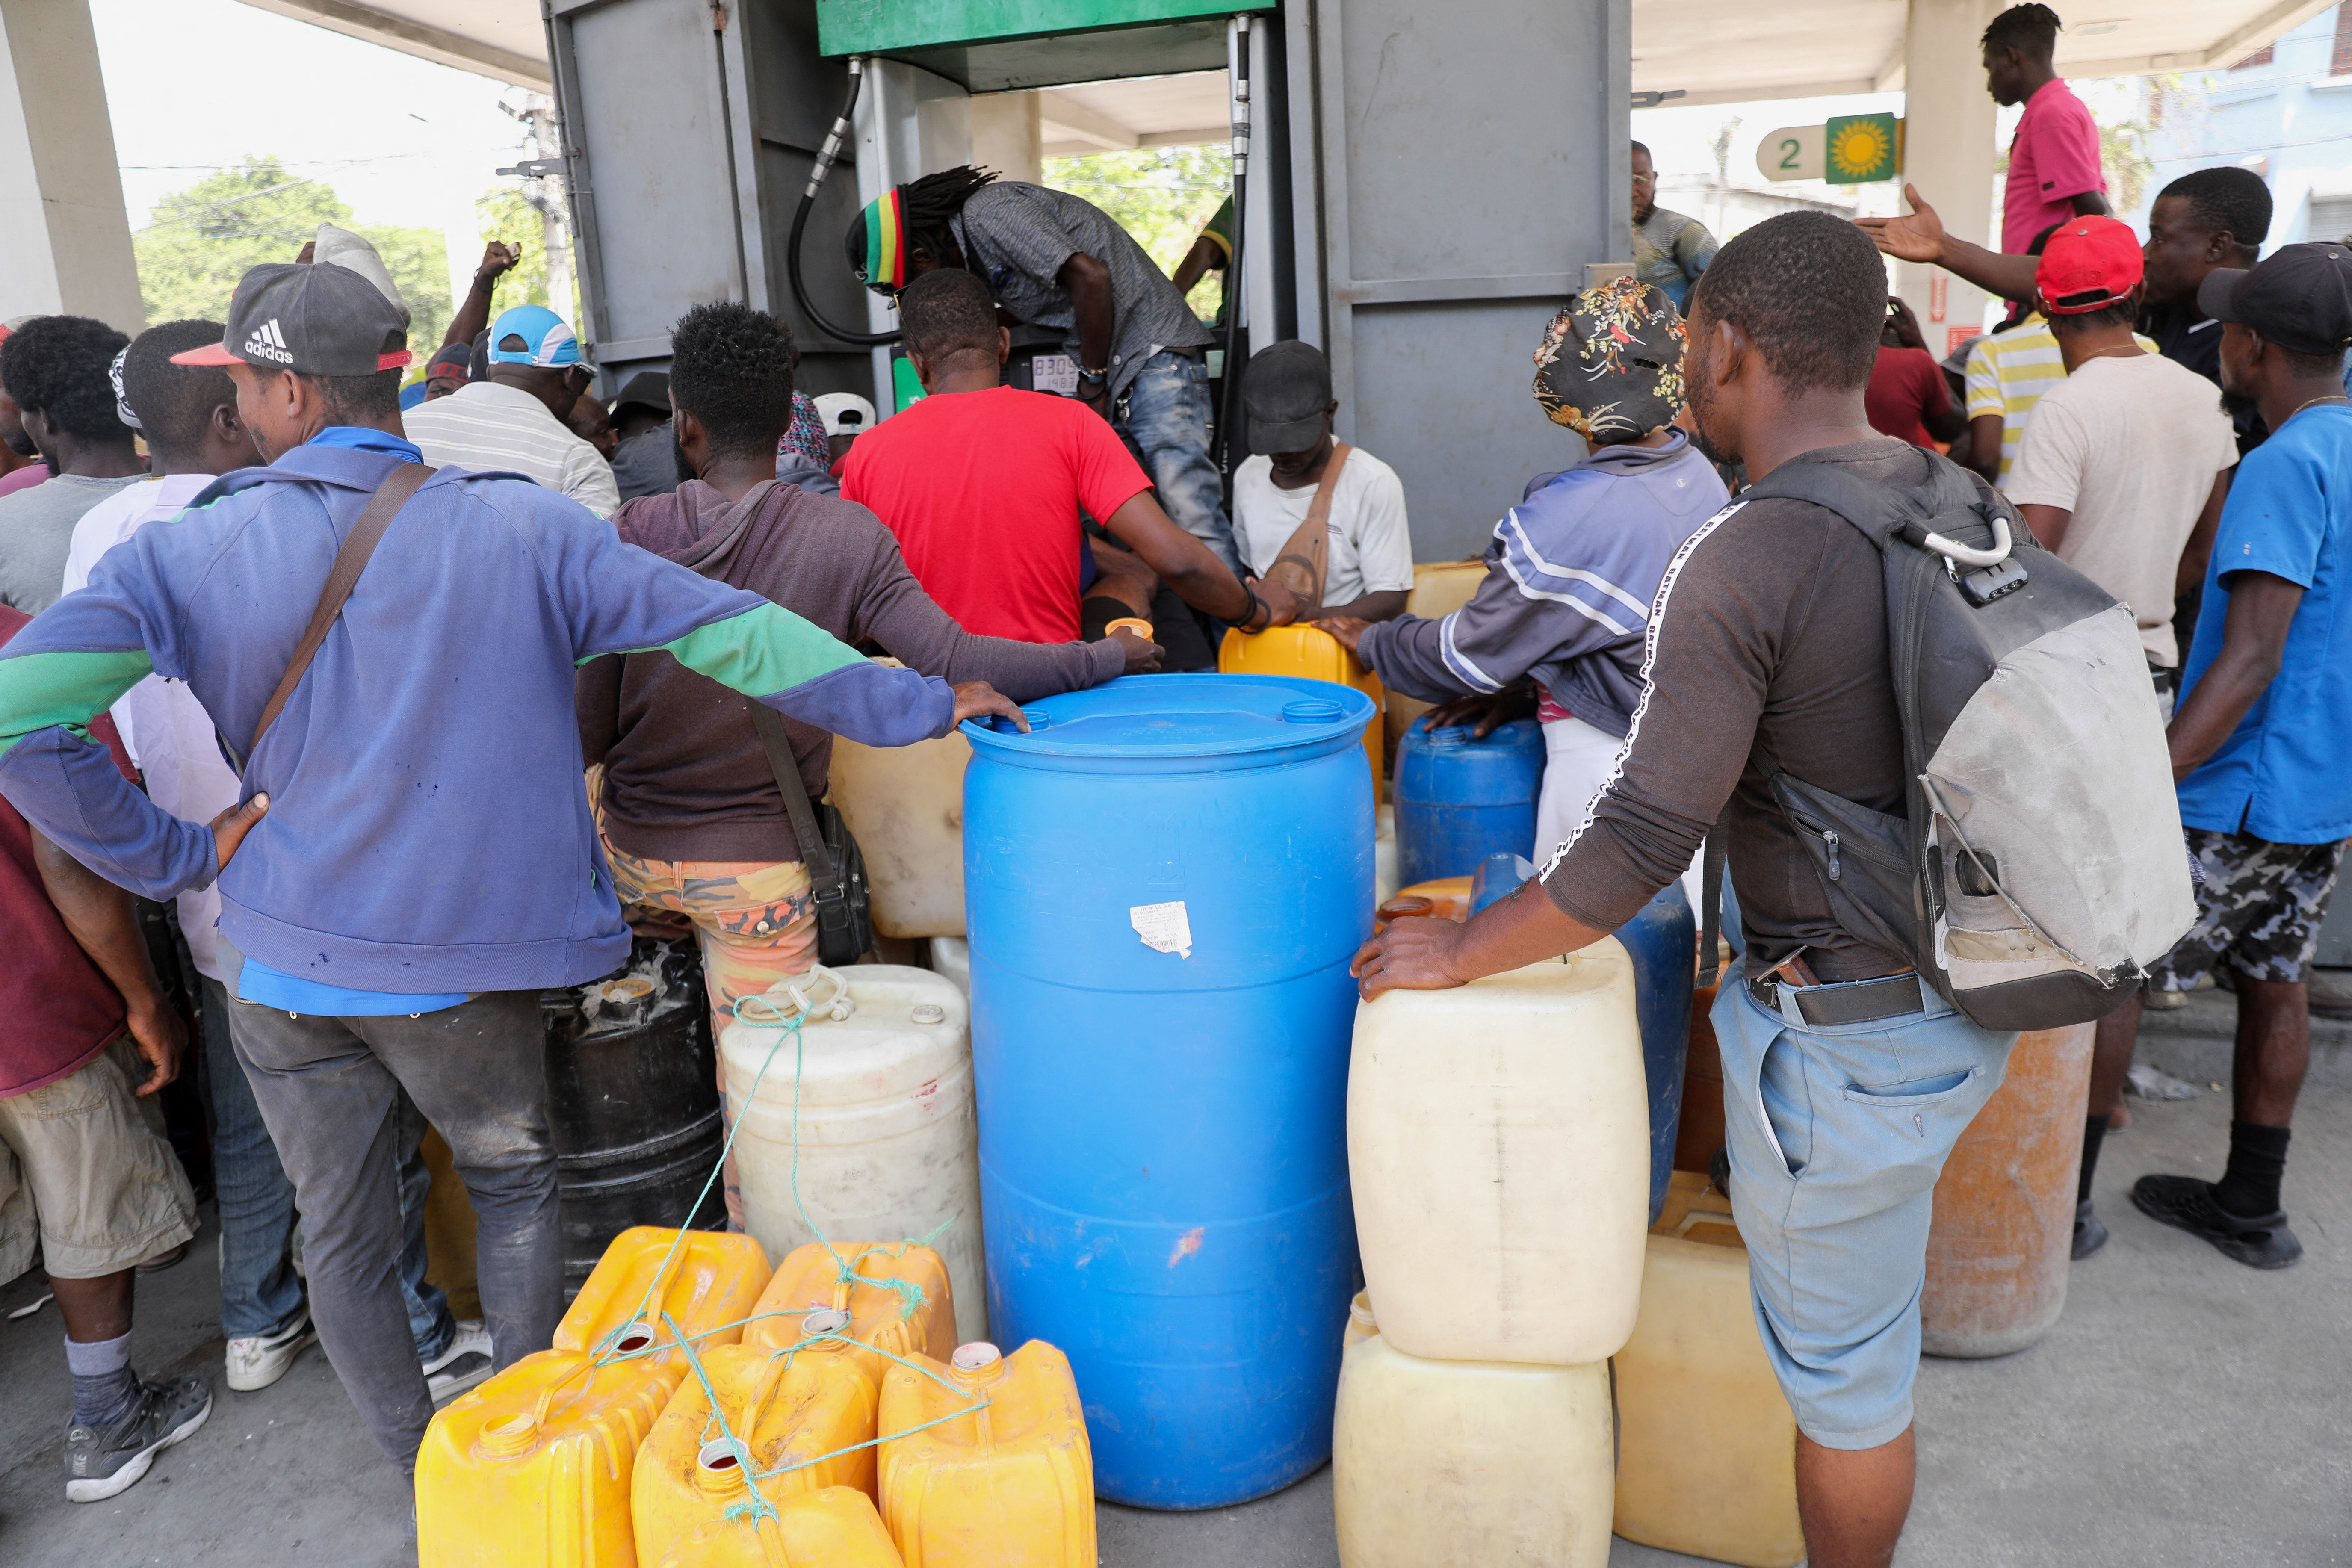 People gather to buy gasoline at a petrol station in Port-au-Prince